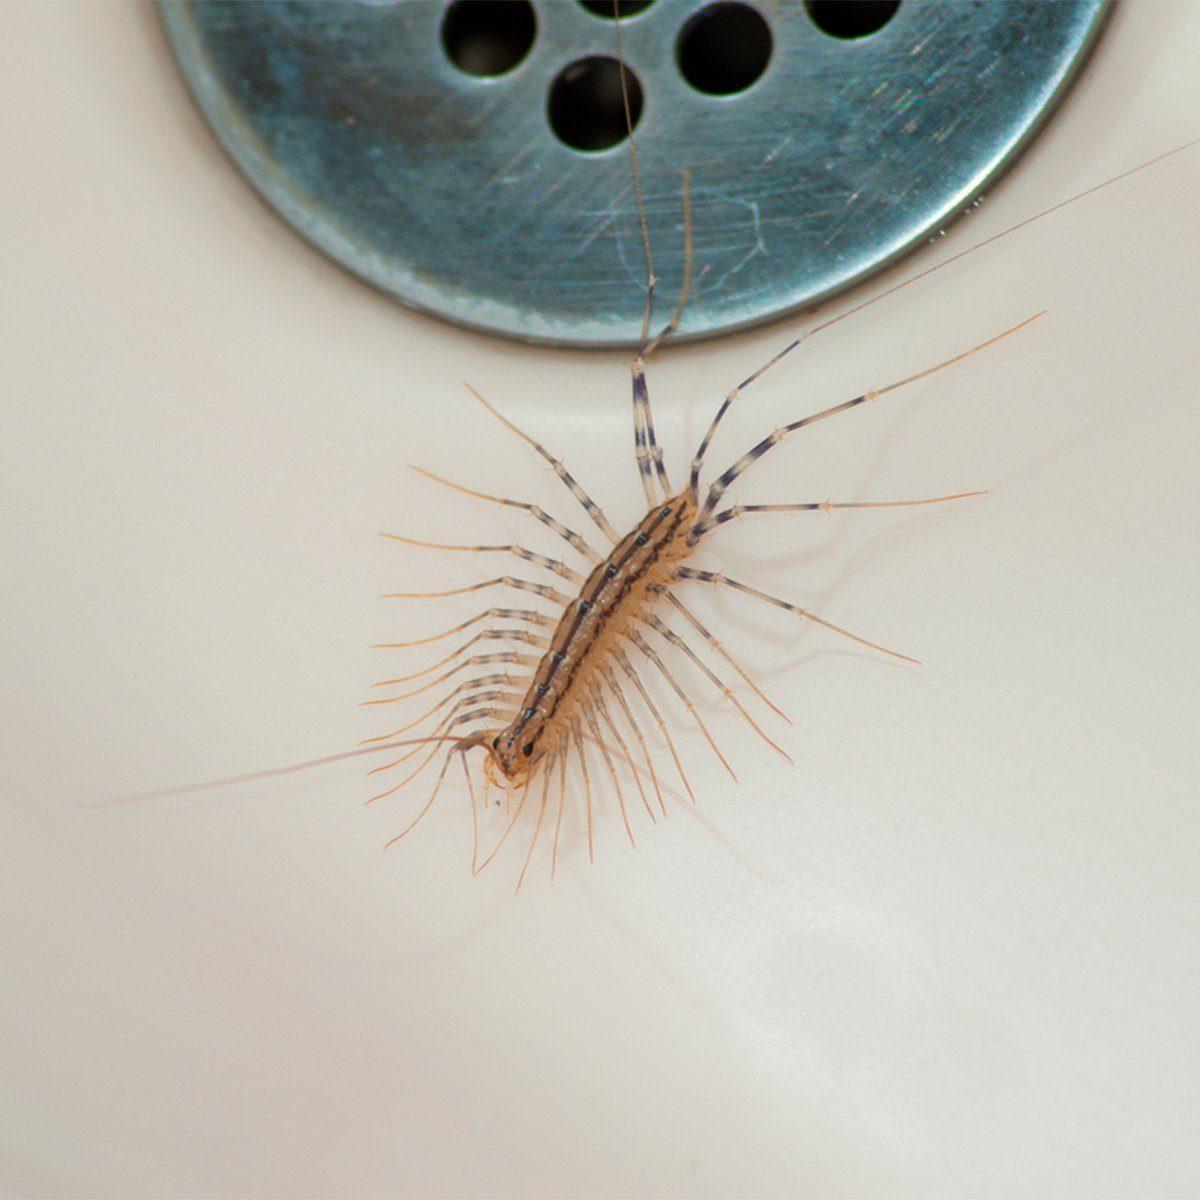 what a house centipede looks like